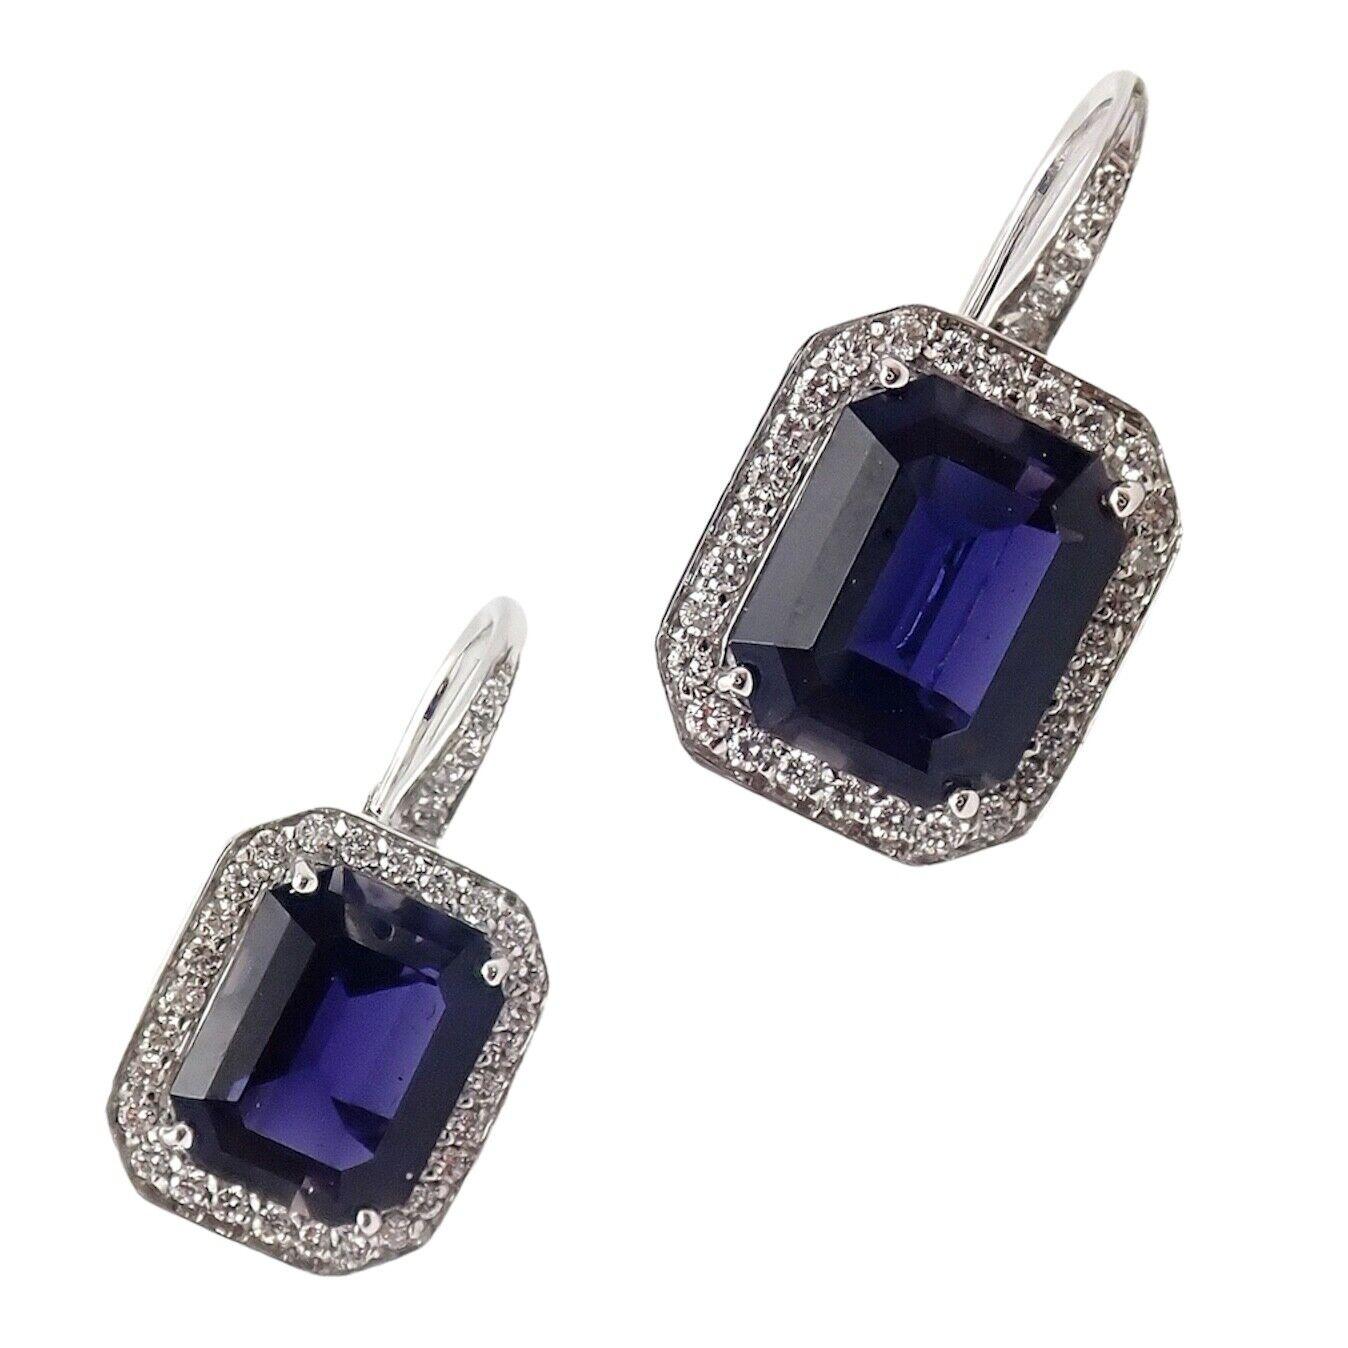 18k White Gold Diamond Iolite Earrings by Pasquale Bruni.
With 2 Iolite stones, 8mm x 10mm
70 Round Brilliant Cut Diamonds G/VS2, Total Weight approximately 0.70ctw
These earrings come with Box and Certificate.
Retail Price: